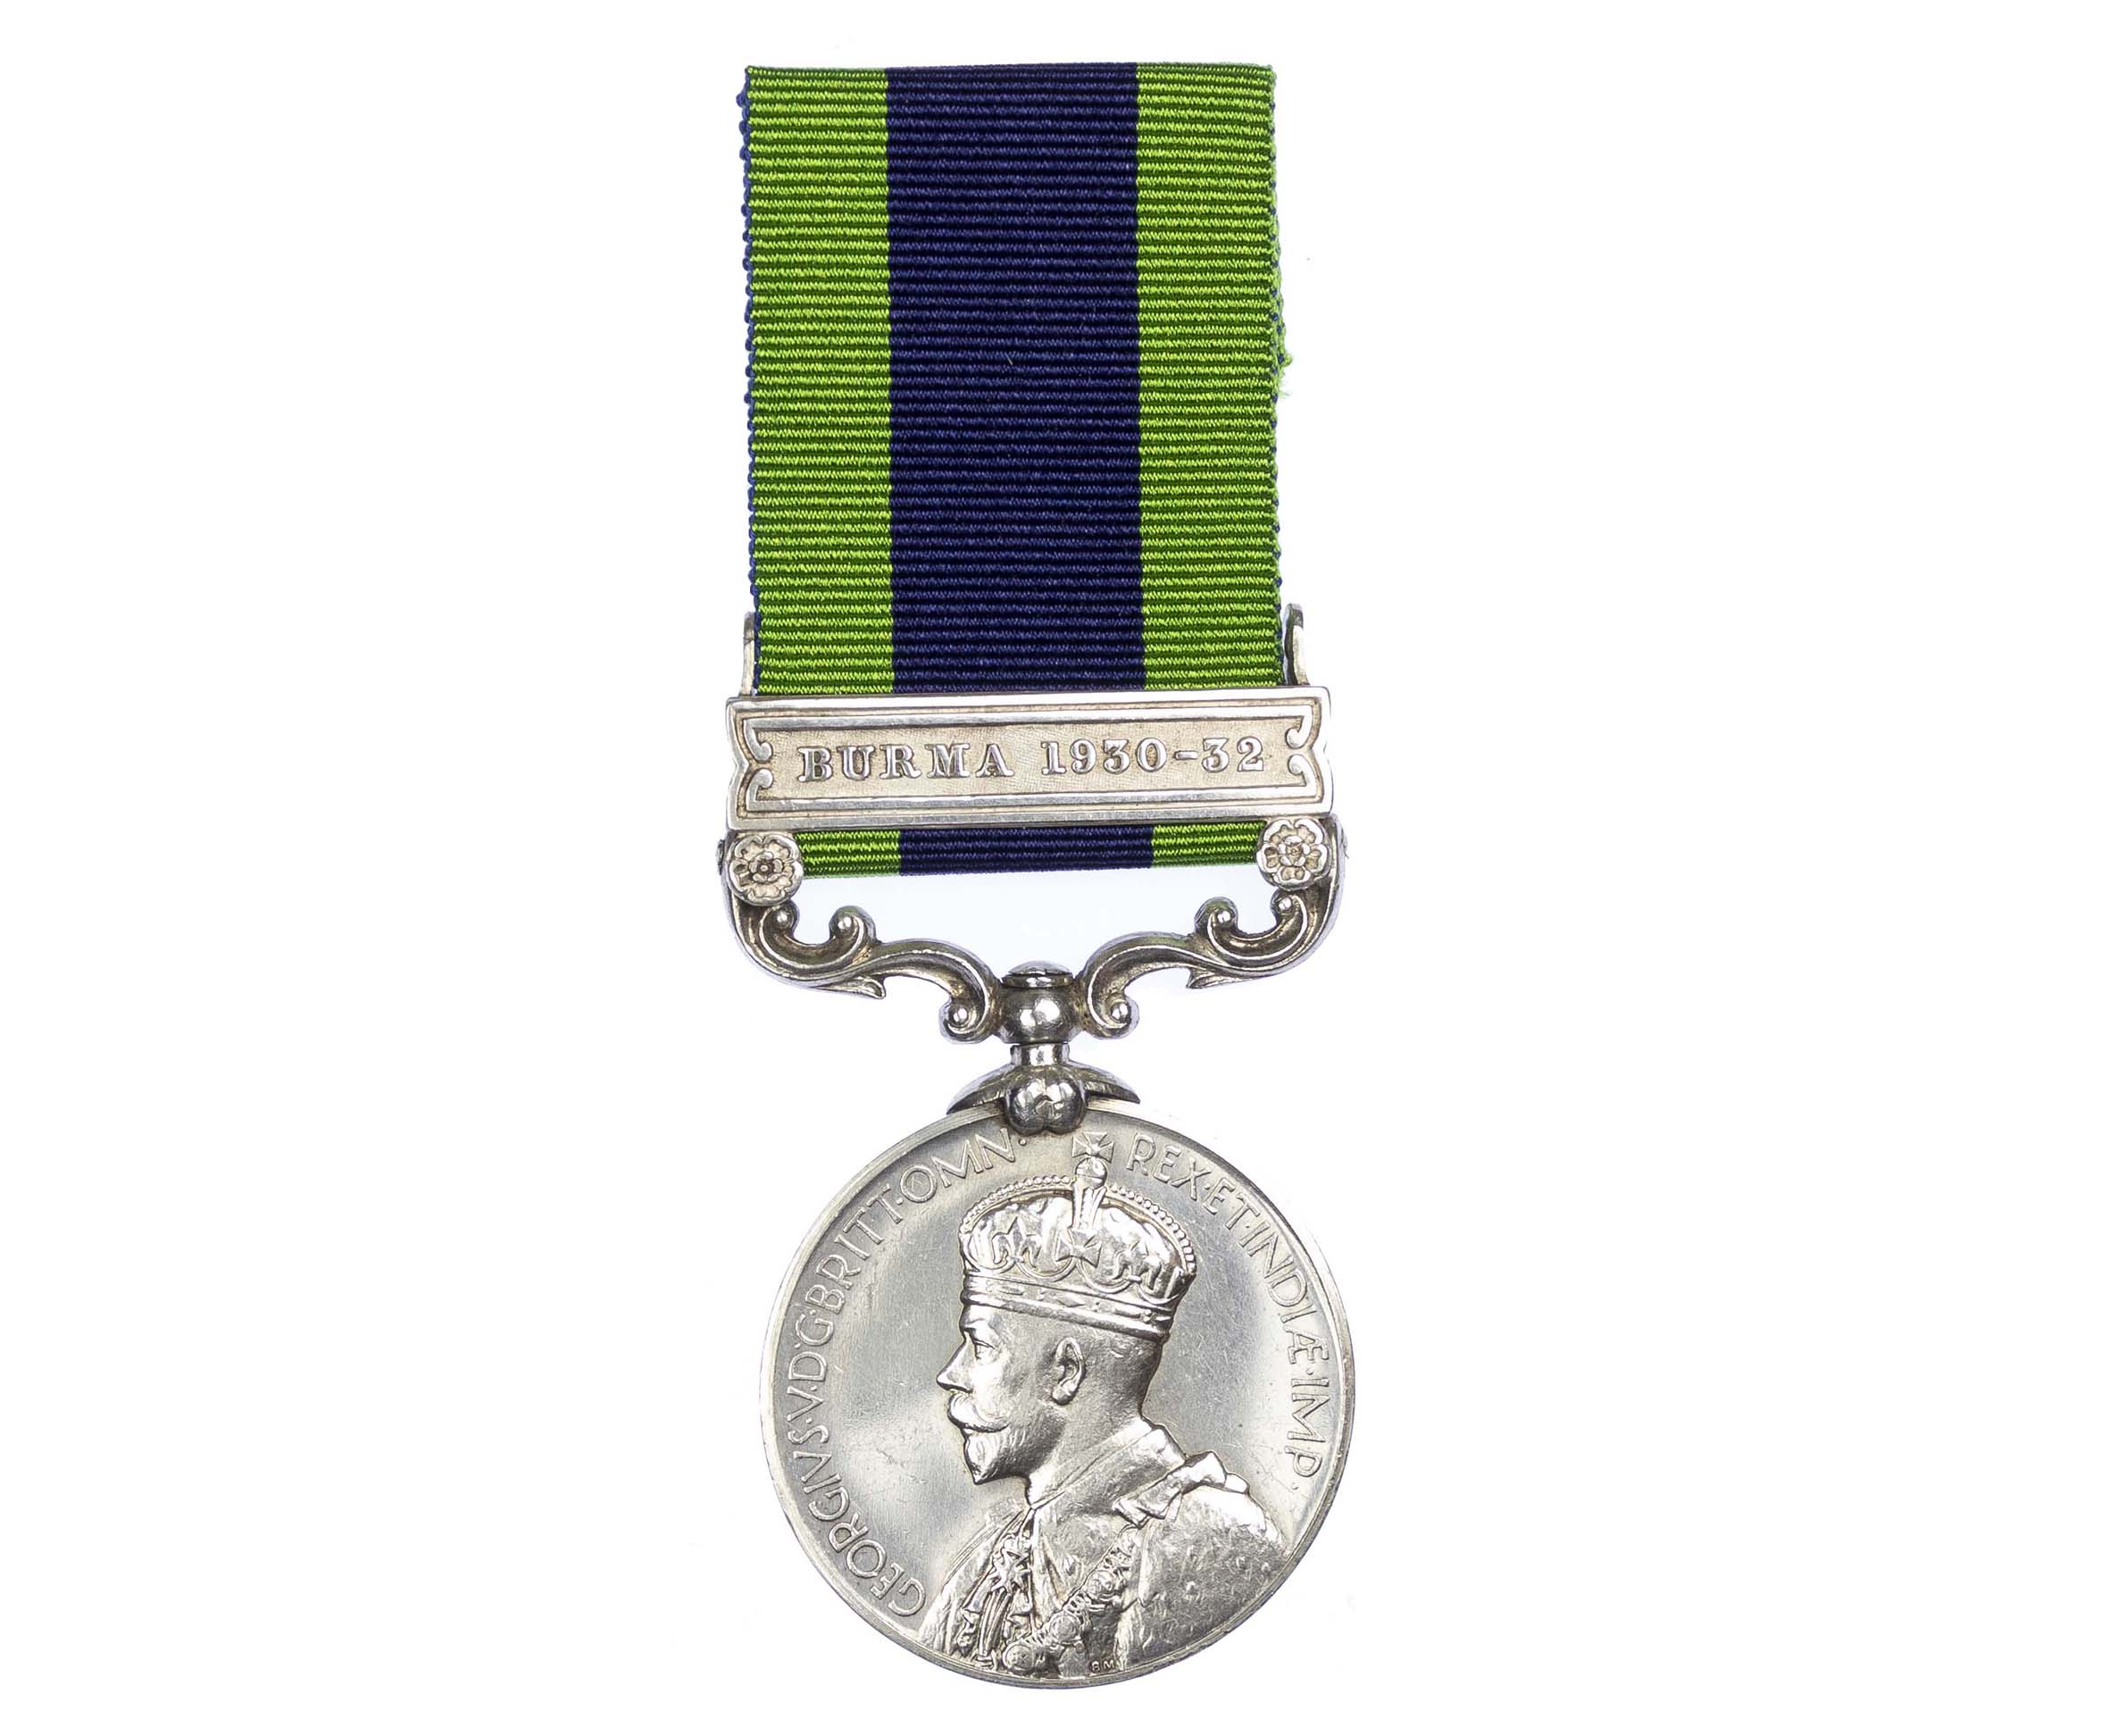 India General Service Medal 1908-35, one clasp, Burma 1930-32, to Special Constable Maung Tha Shu